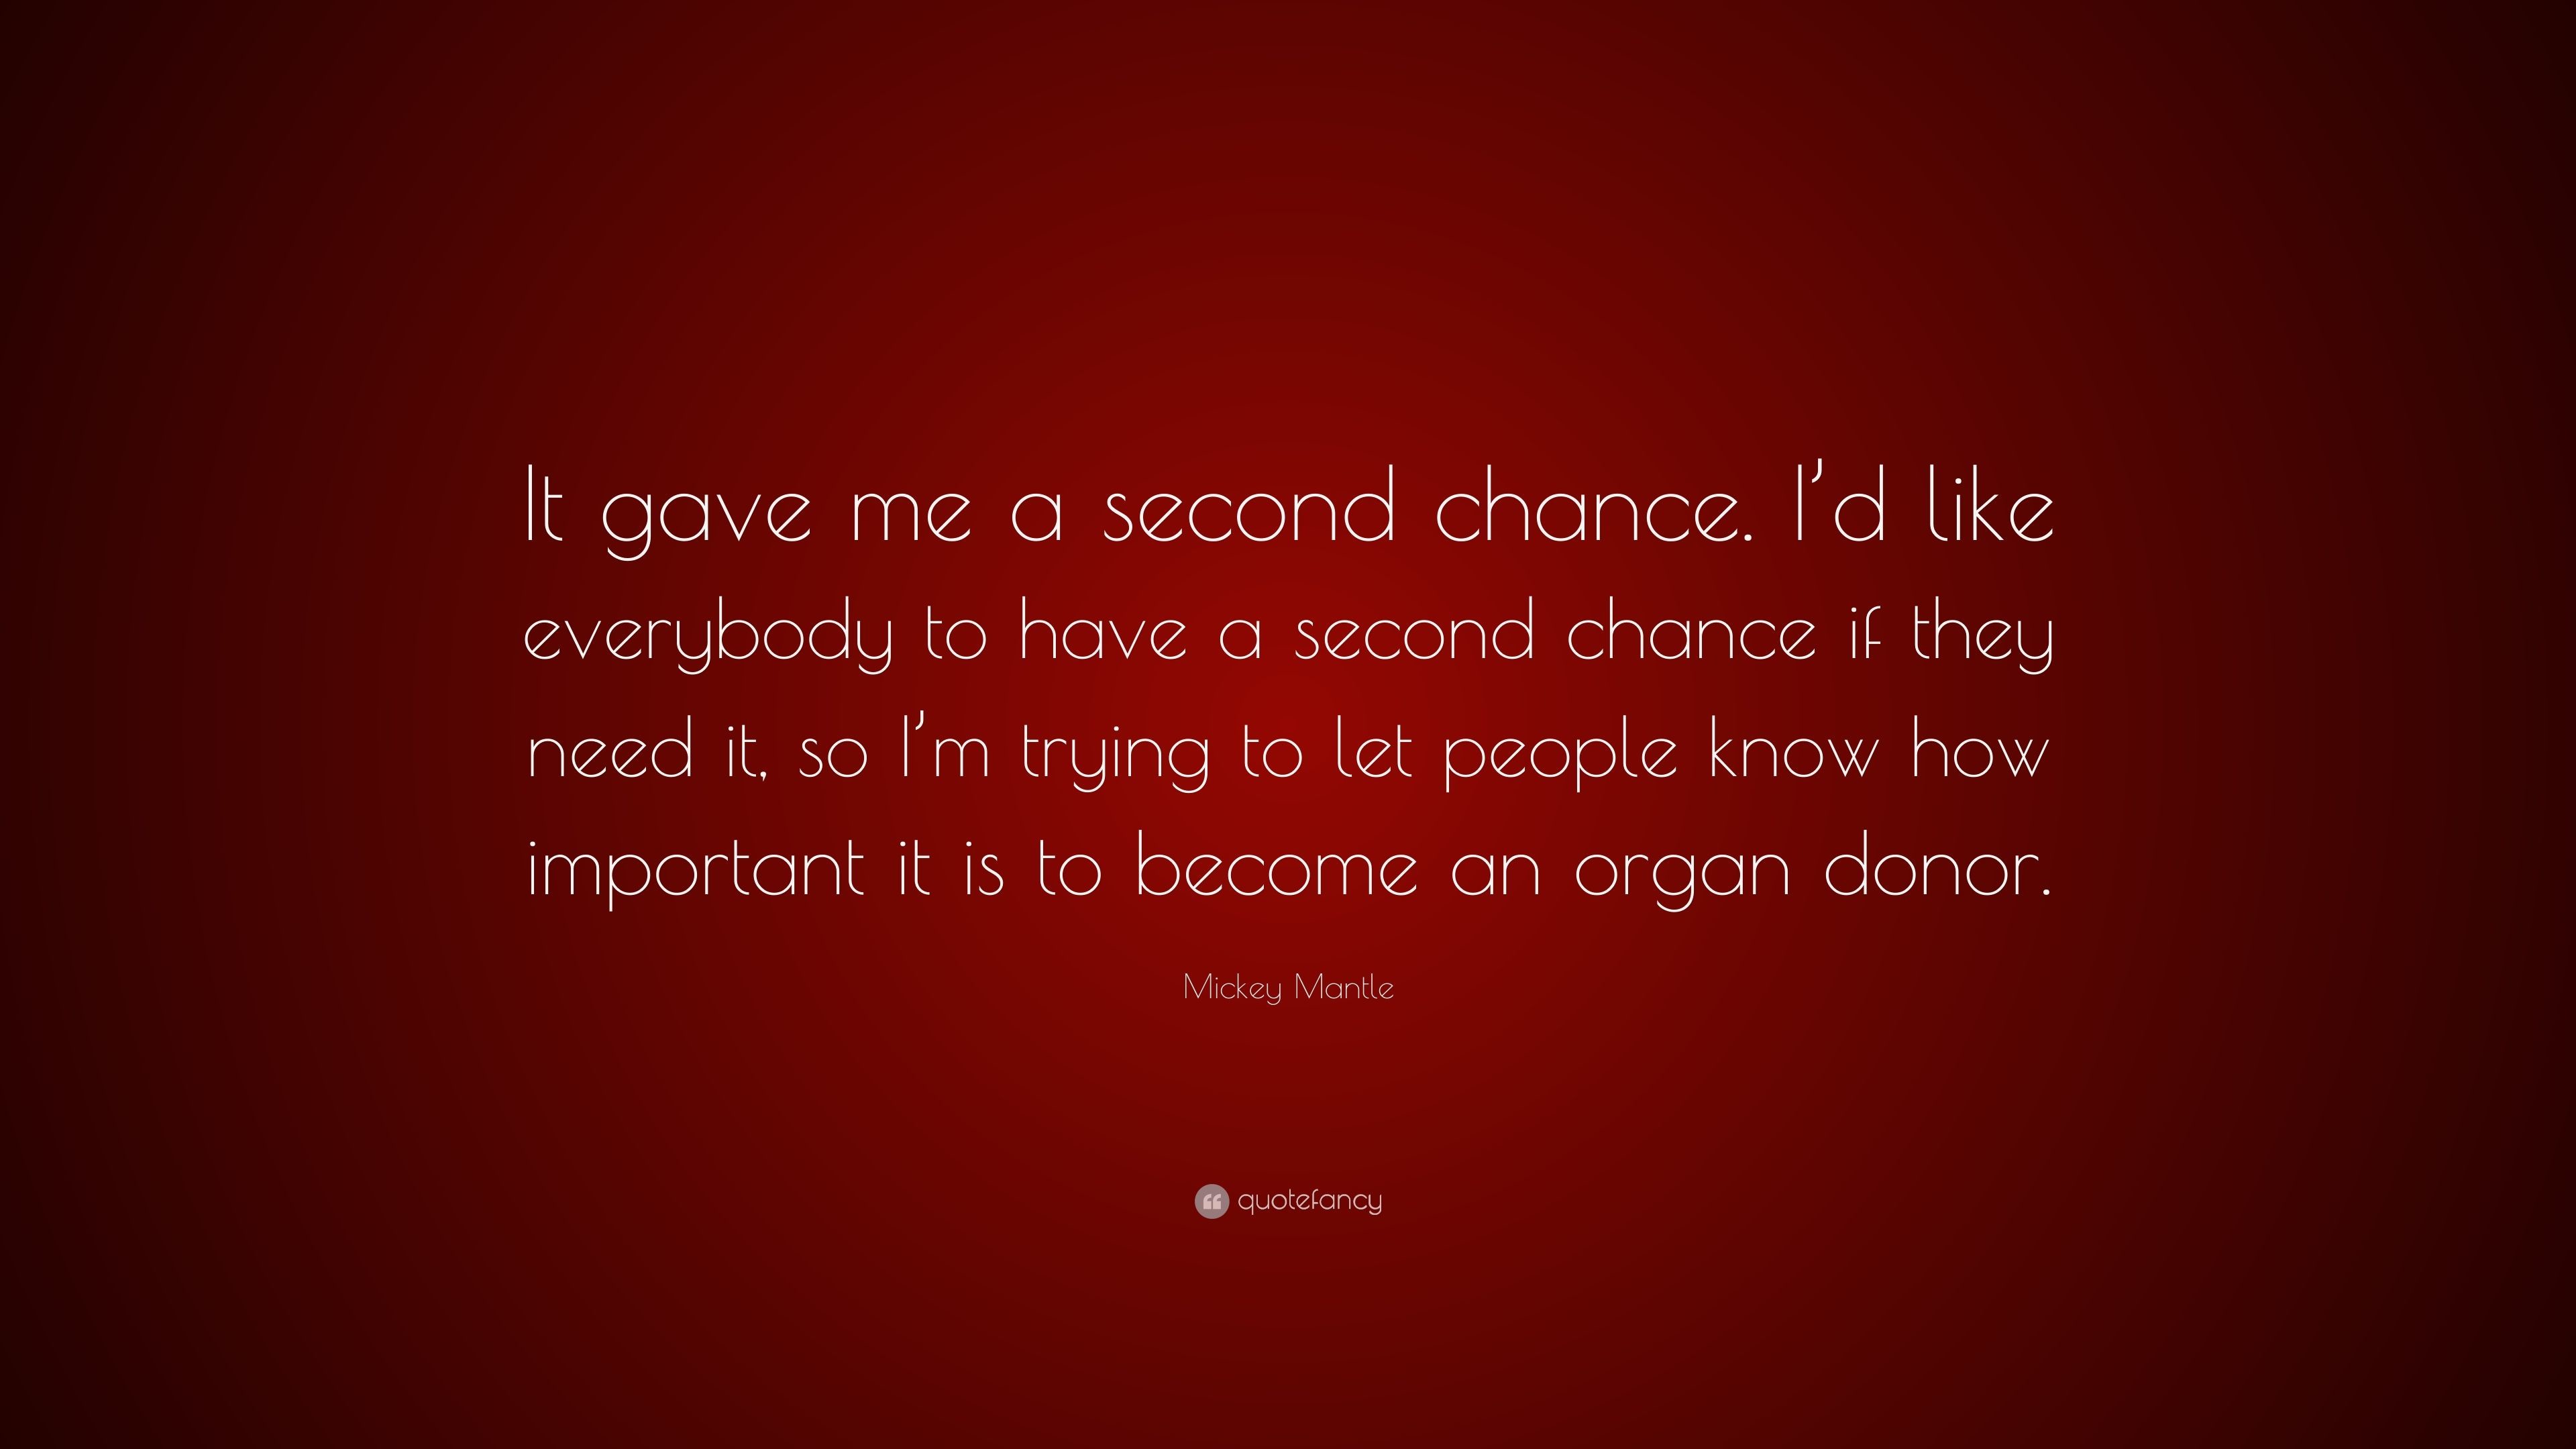 3840x2160 Mickey Mantle Quote: “It gave me a second chance. I'd like